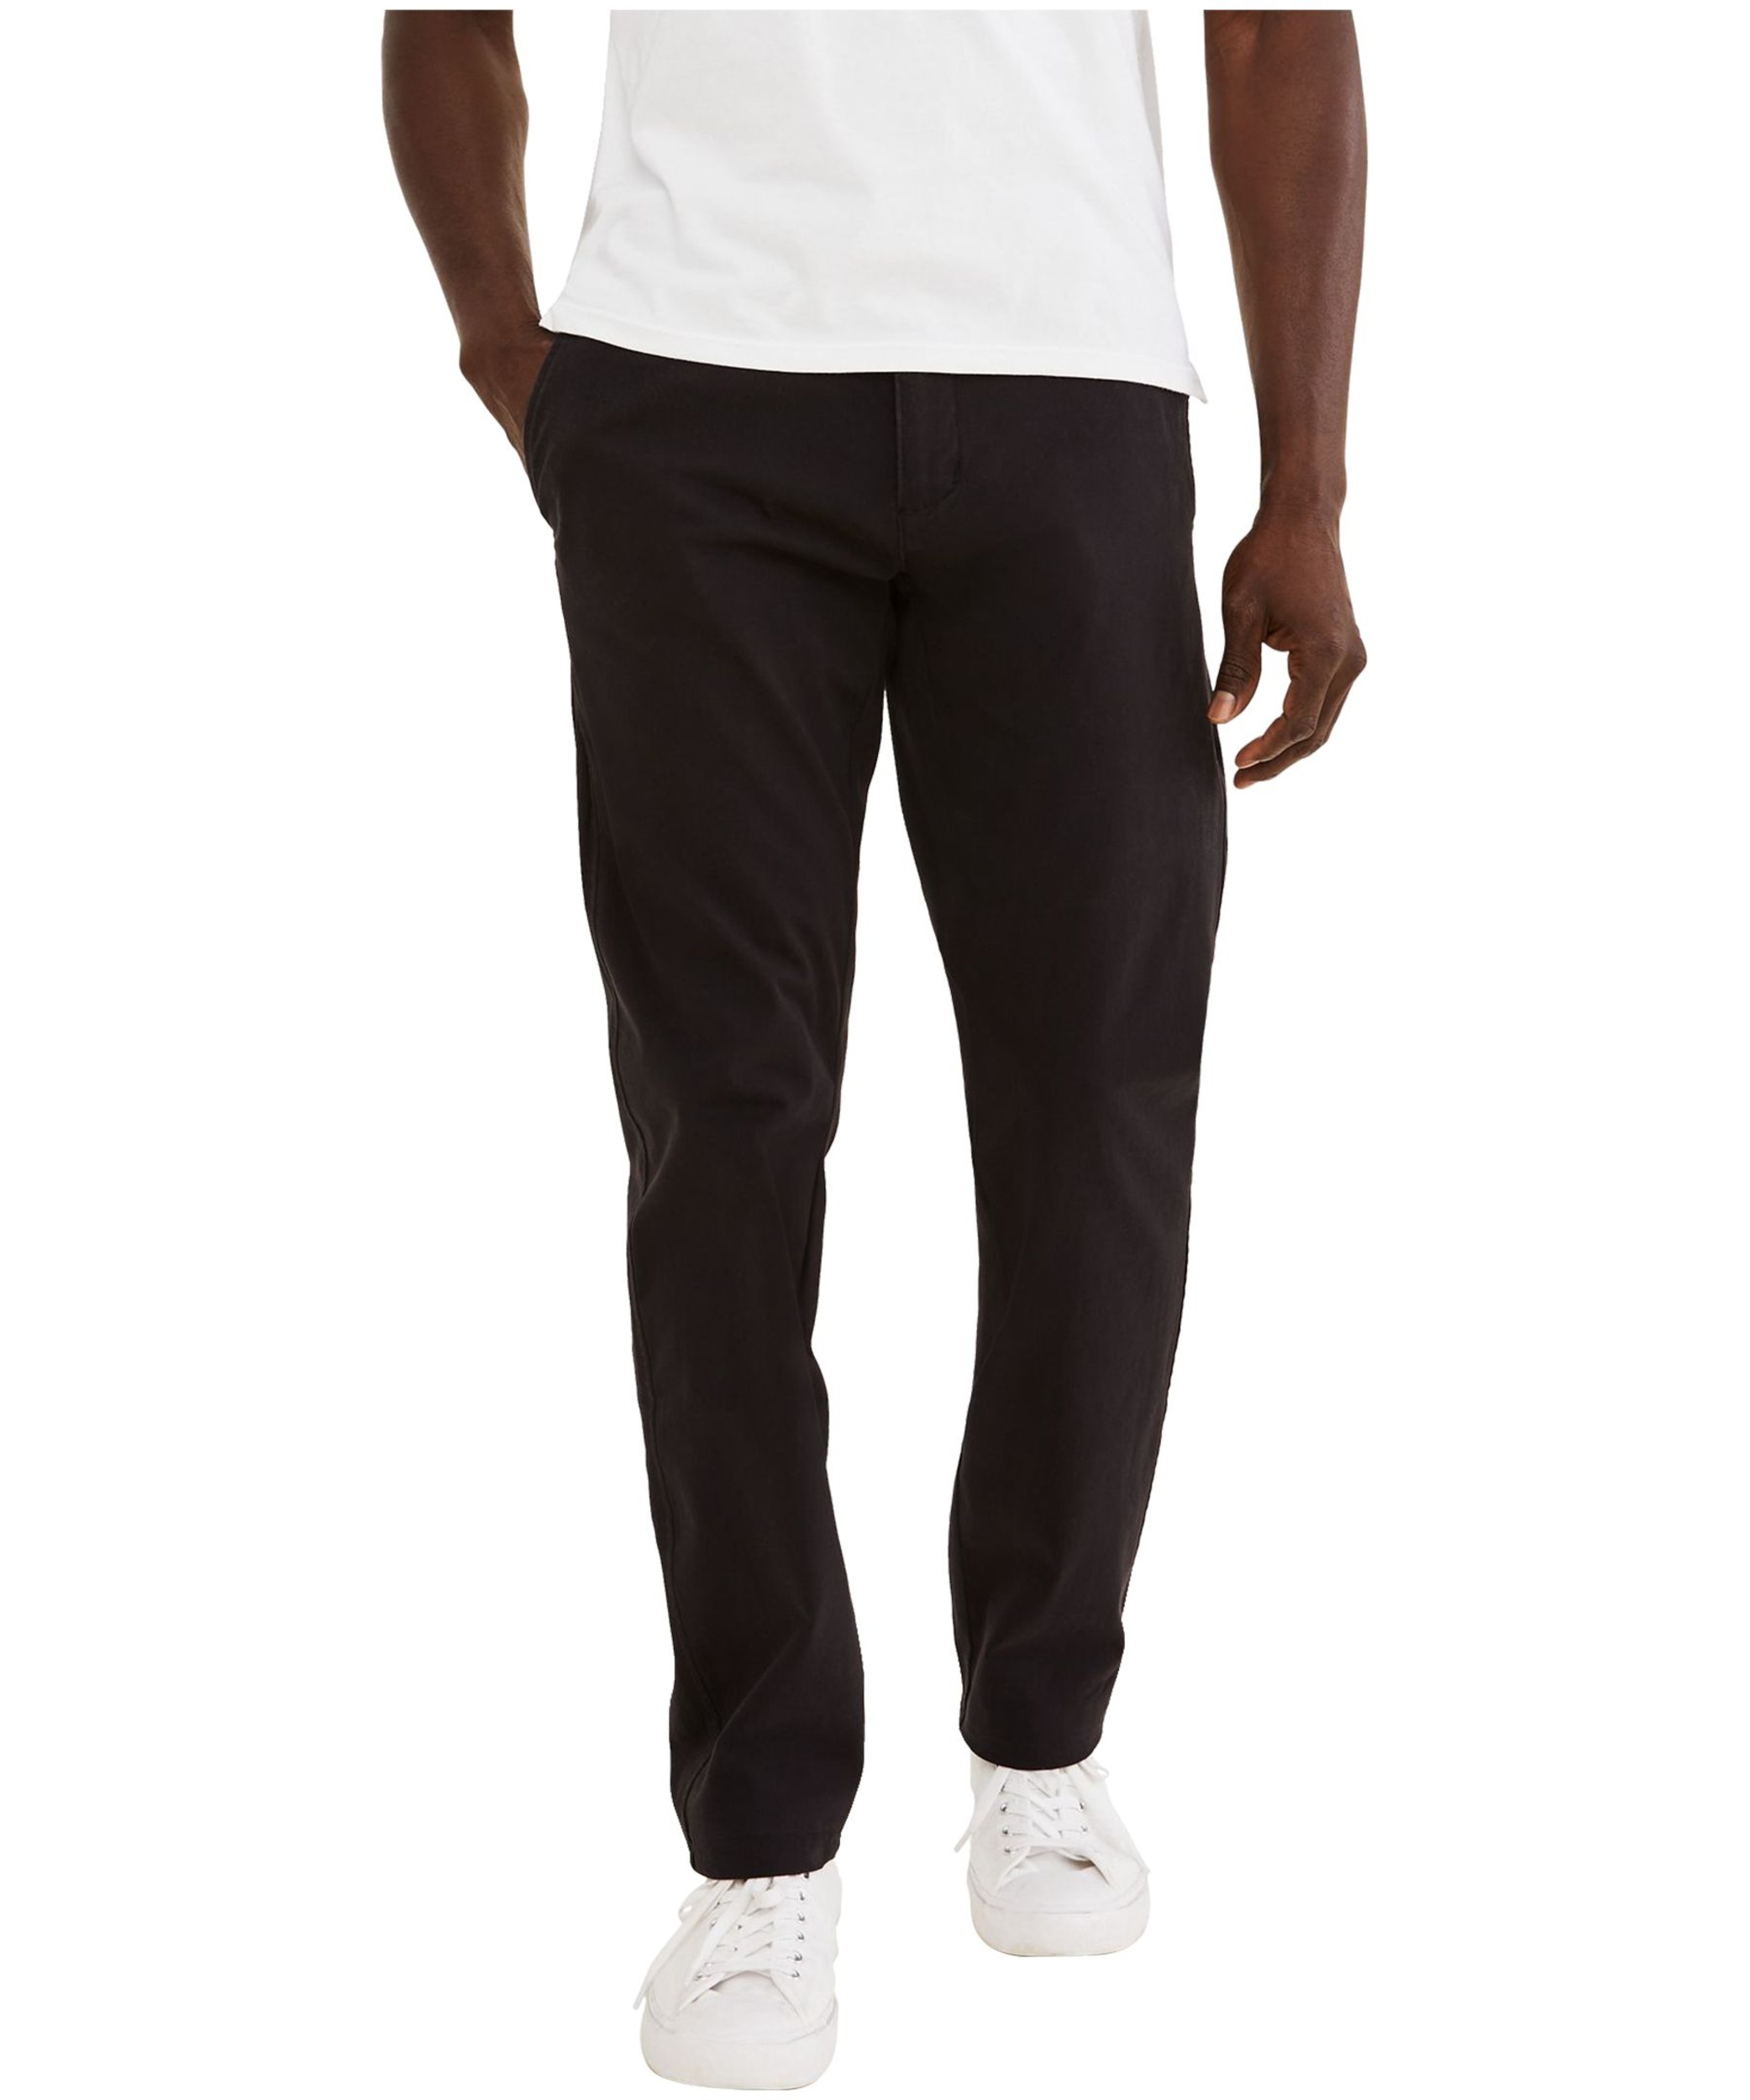 Dockers Men's Smart 360 Flex Athletic Fit Ultimate Chino Pants | Marks